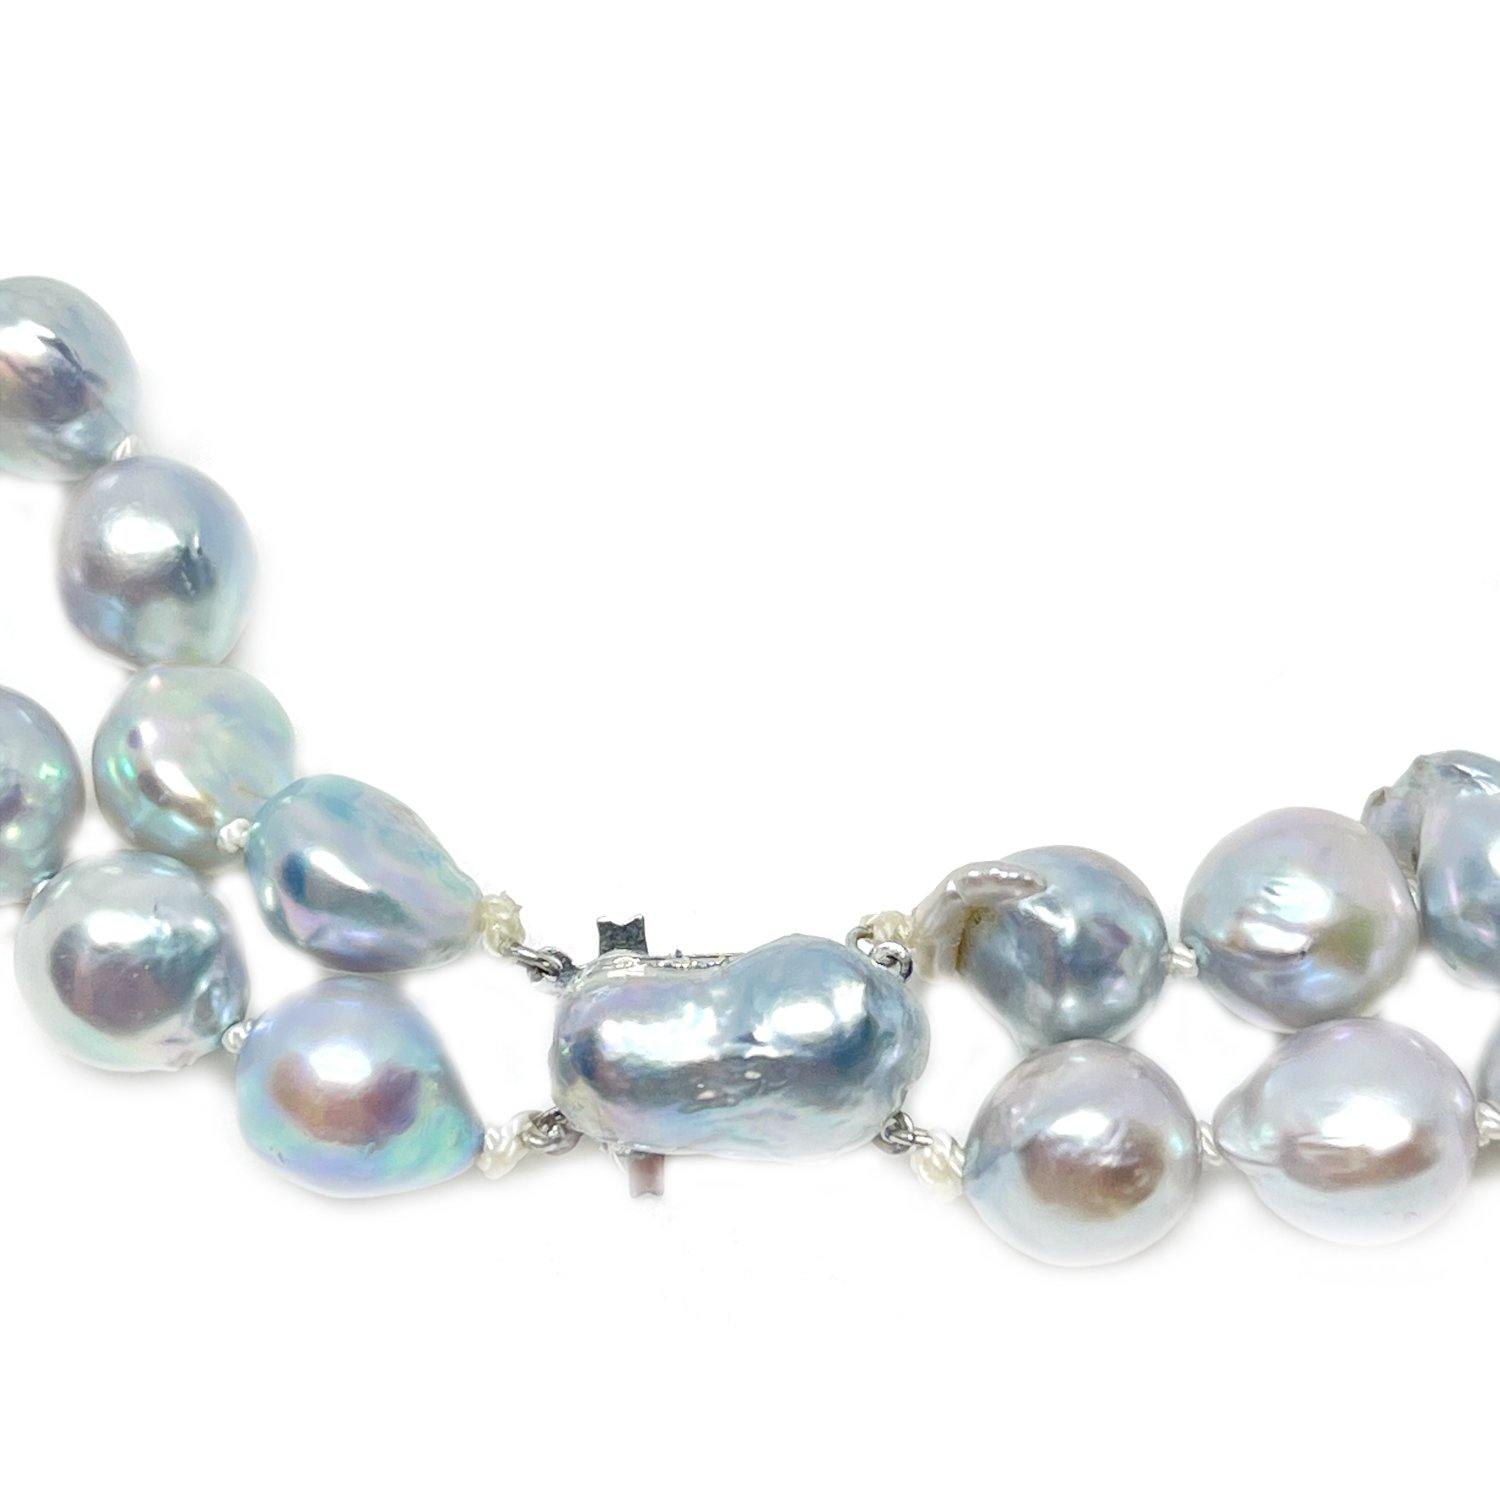 Double Strand Blue Japanese Cultured Akoya Pearl Choker Necklace - 14K White Gold 15 & 15.50 Inch